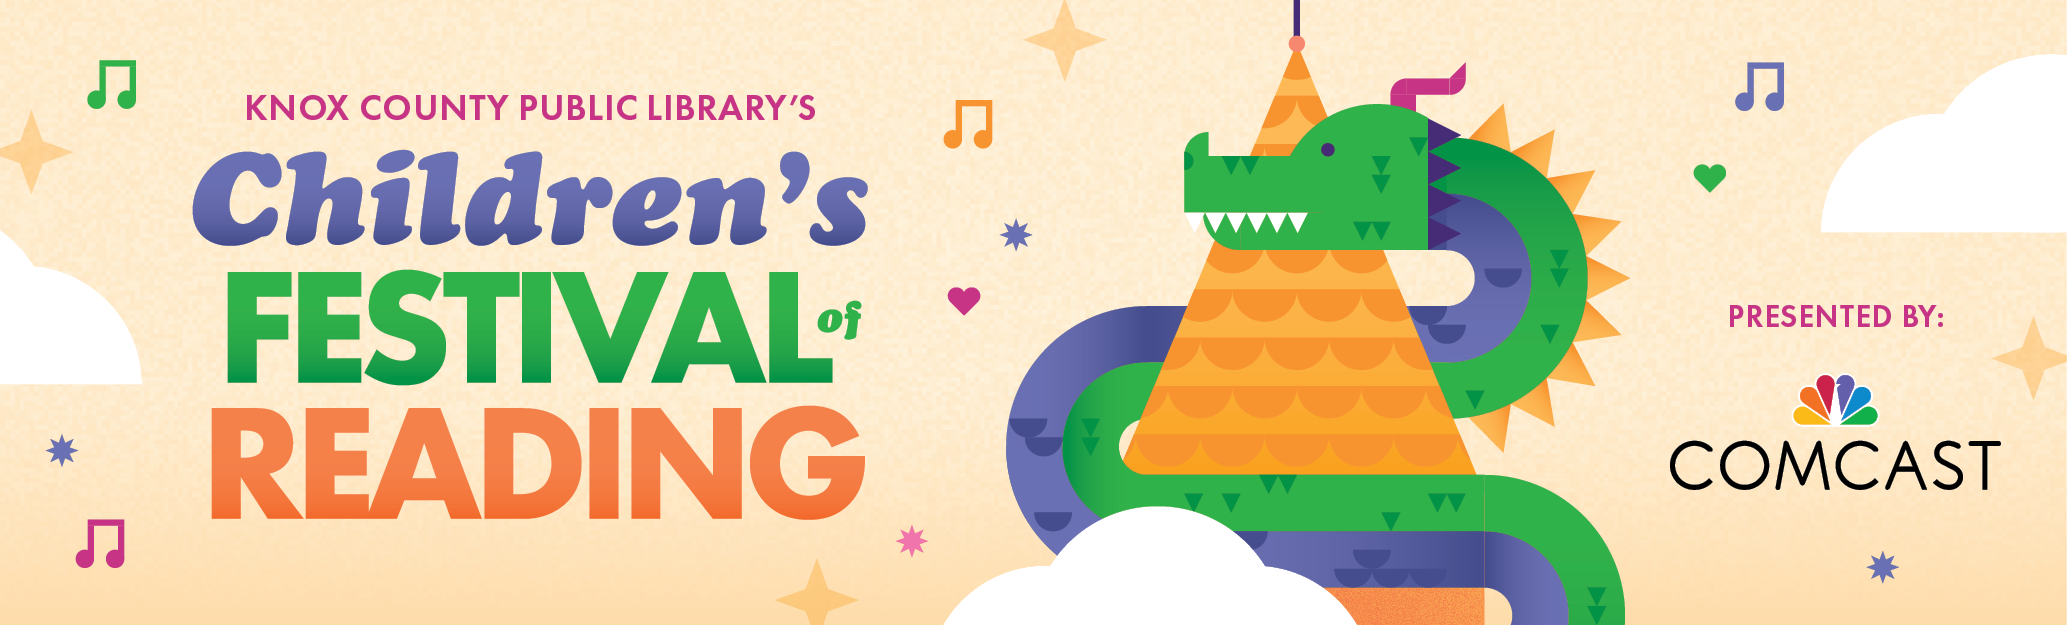 Children's Festival of Reading, Saturday, May 20, presented by Comcast